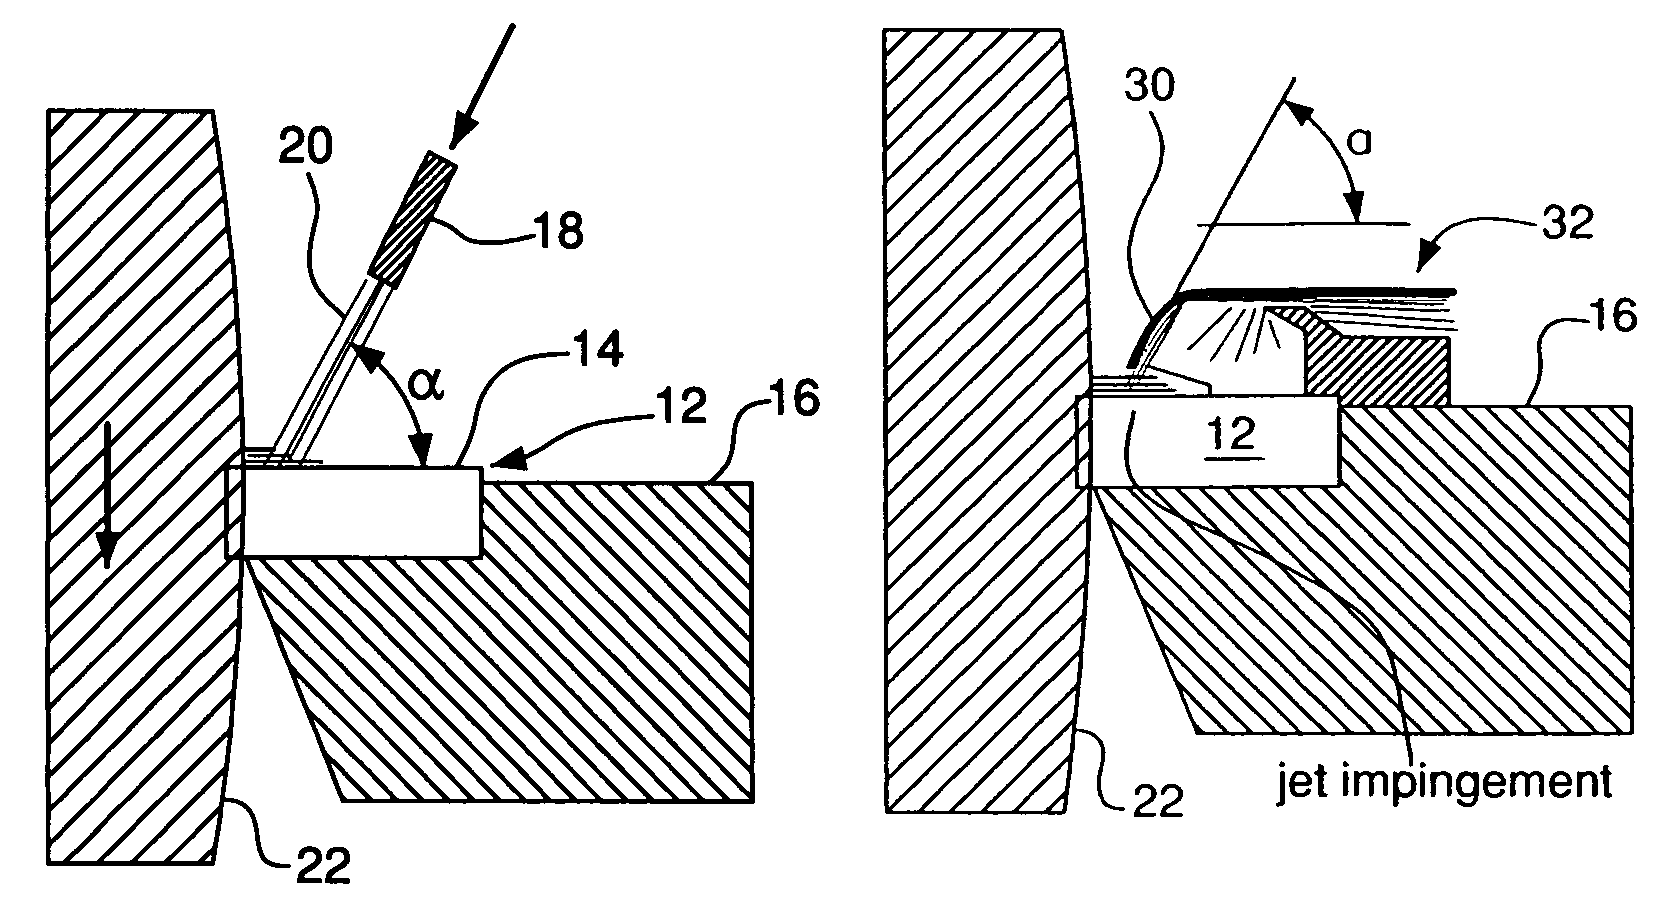 Apparatus and method for improving work surface during forming and shaping of materials